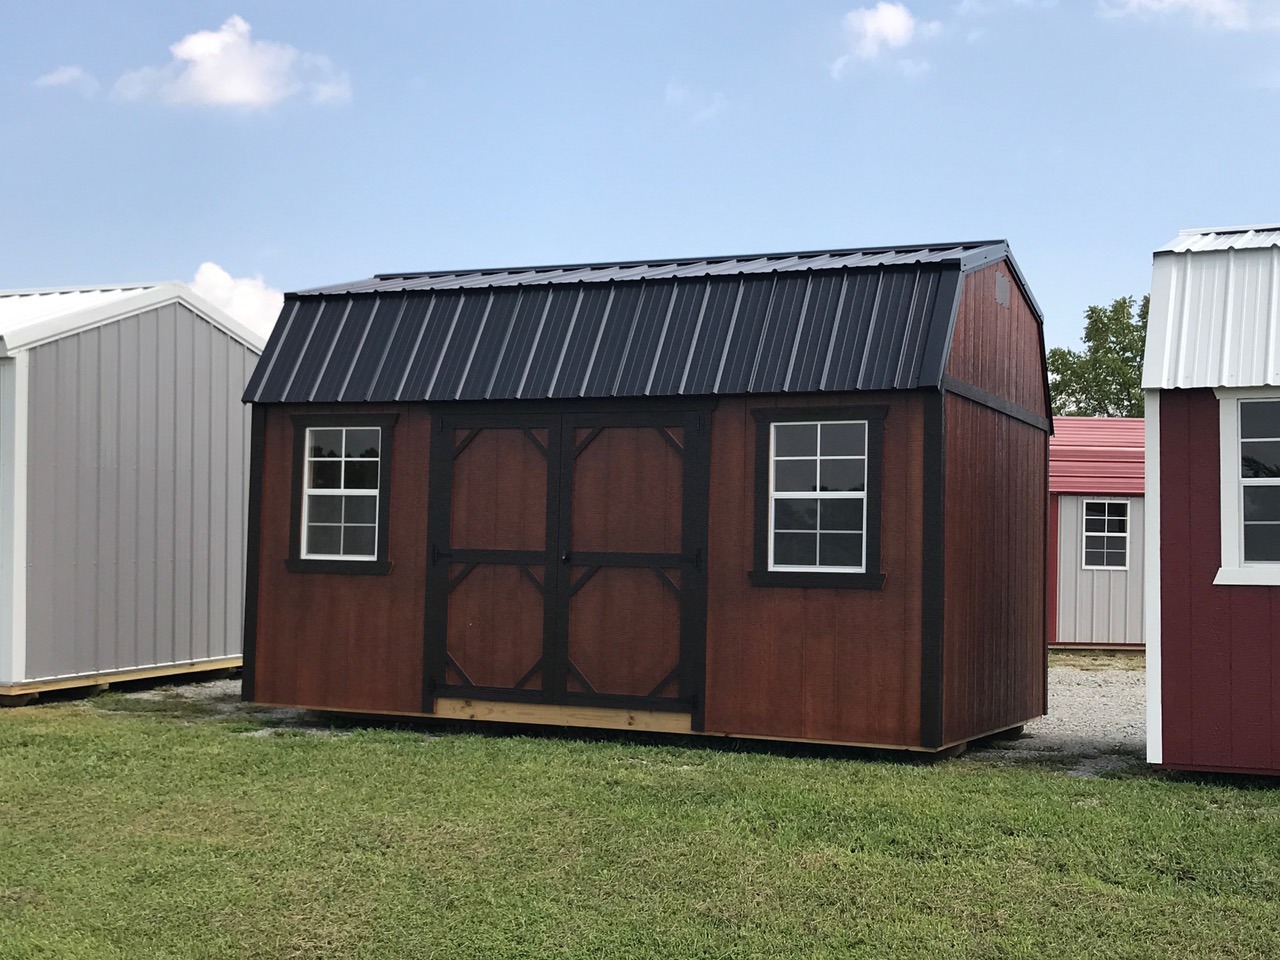 Brown urethane side lofted barn with black metal roof